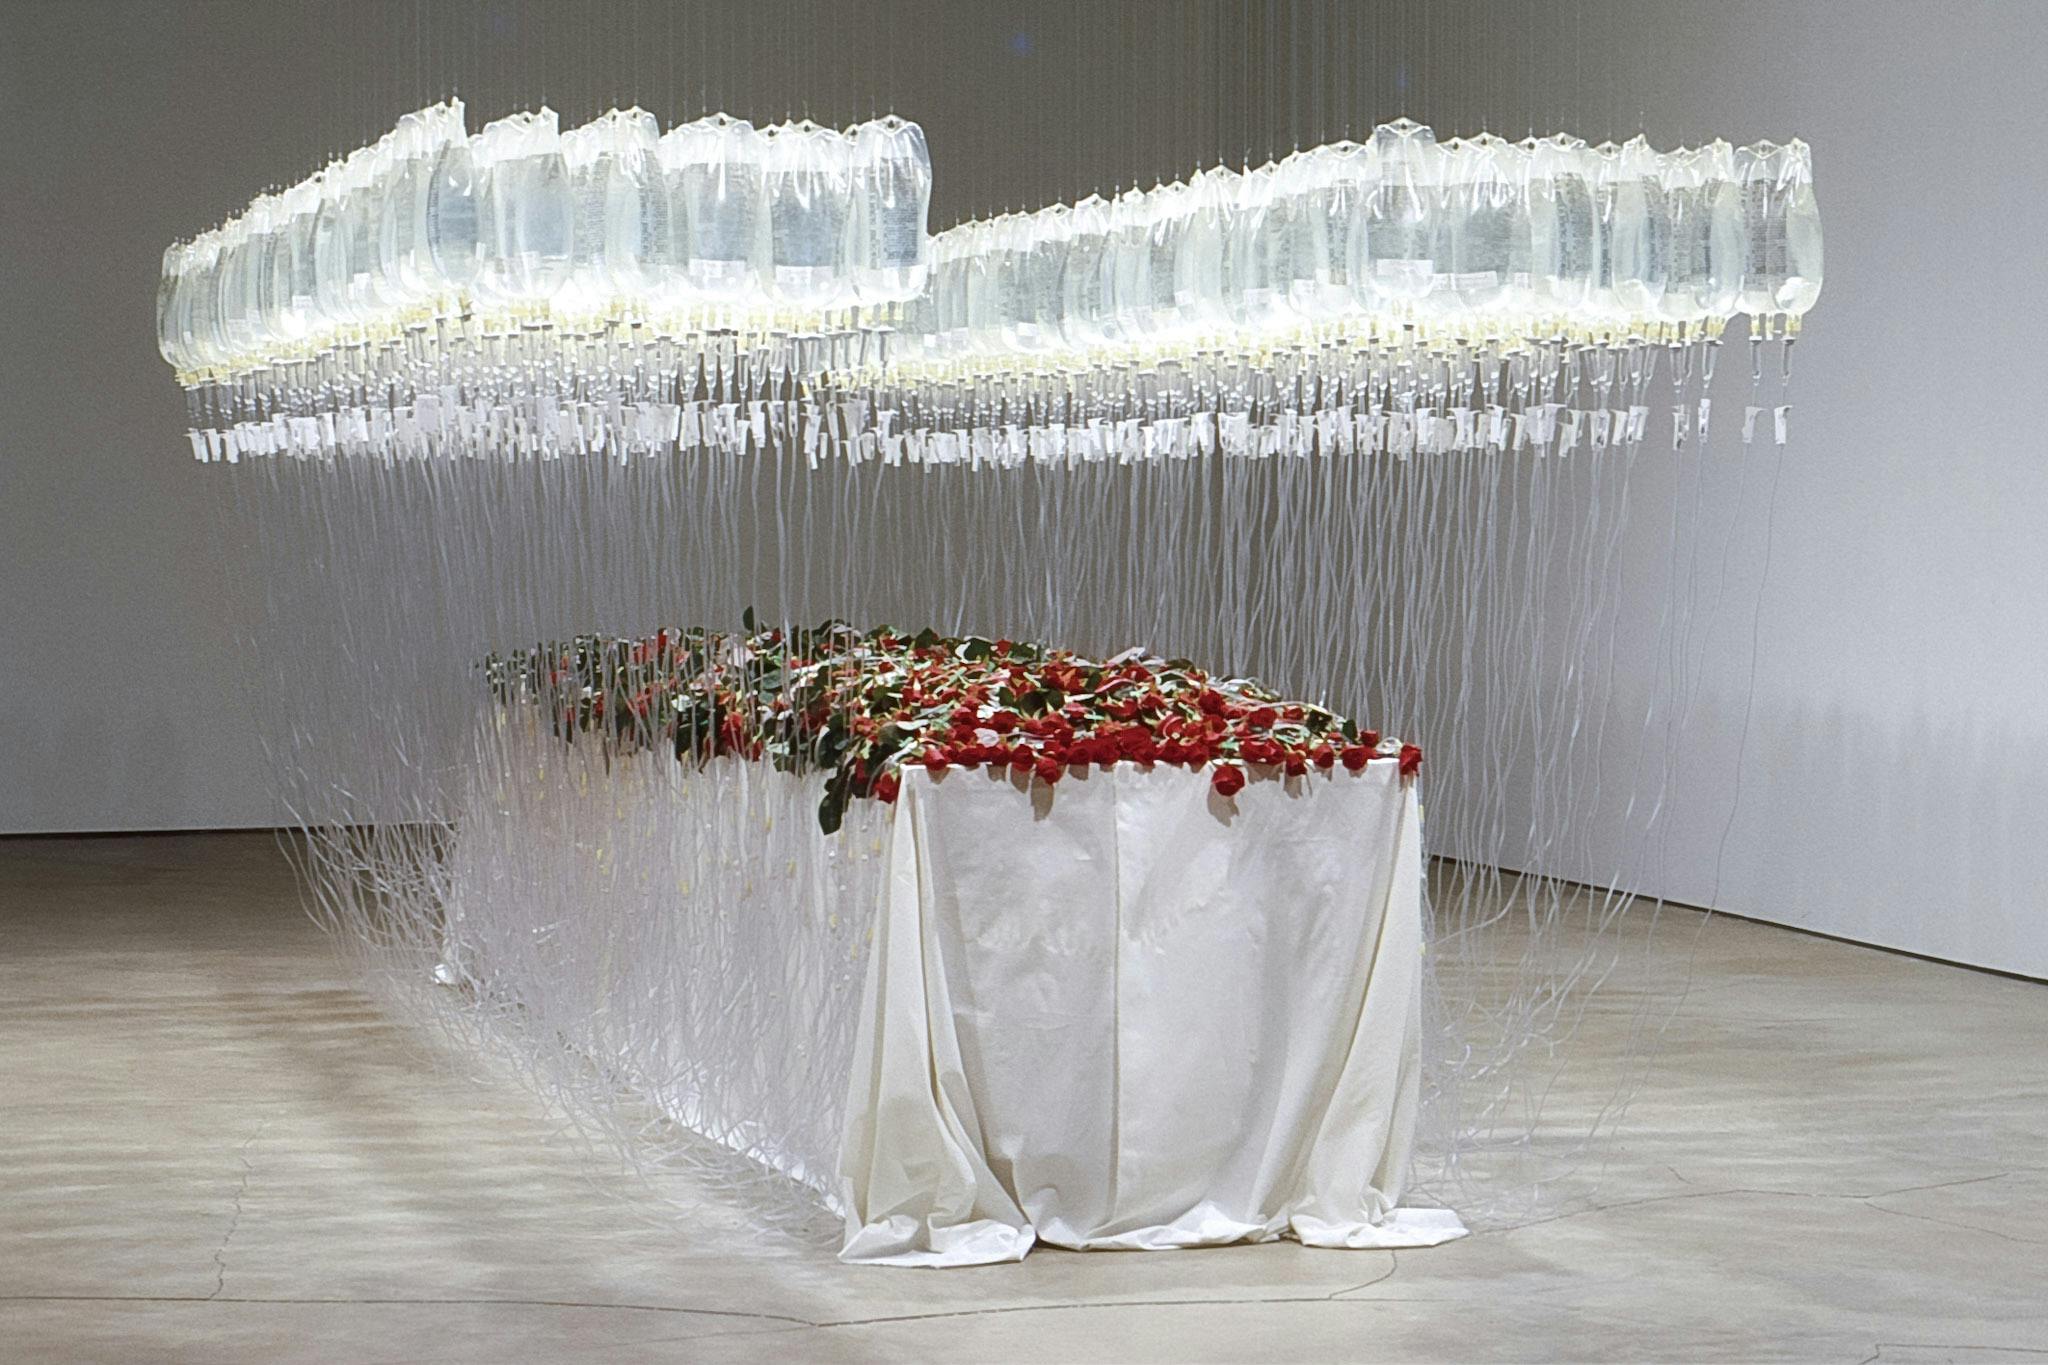 In the gallery, a bed covered by a white sheet is installed. Dozens of red roses, which are tied to the infusion bags via tubes hanging from the ceiling, are placed on the bed.